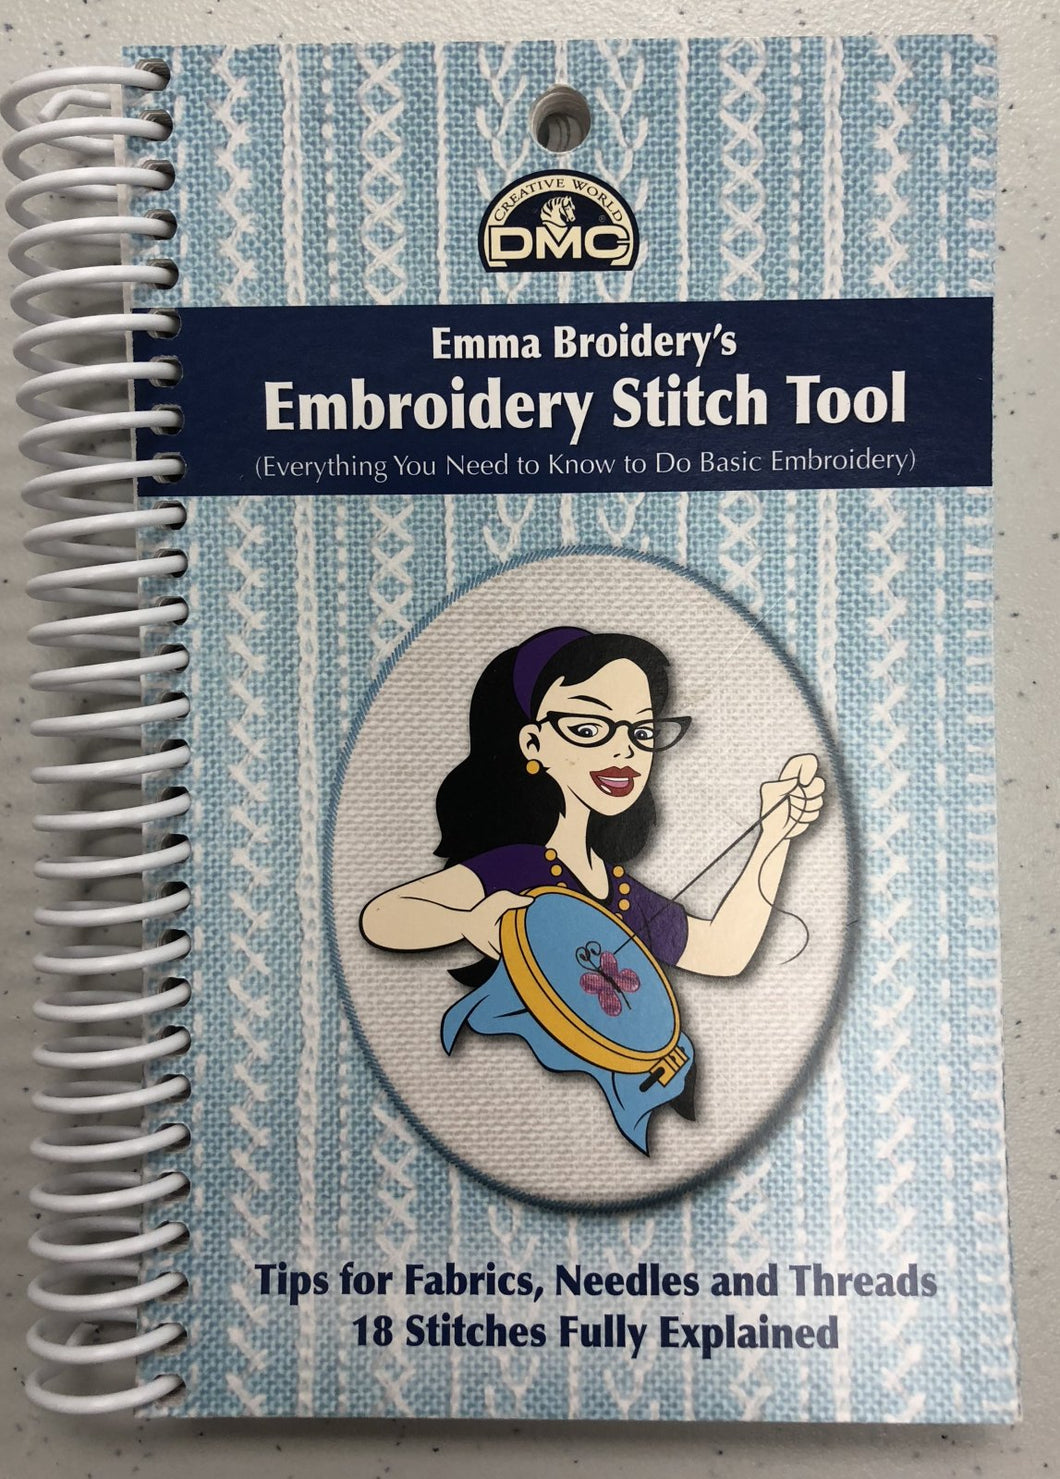 emma broidery's embroidery stitch tool